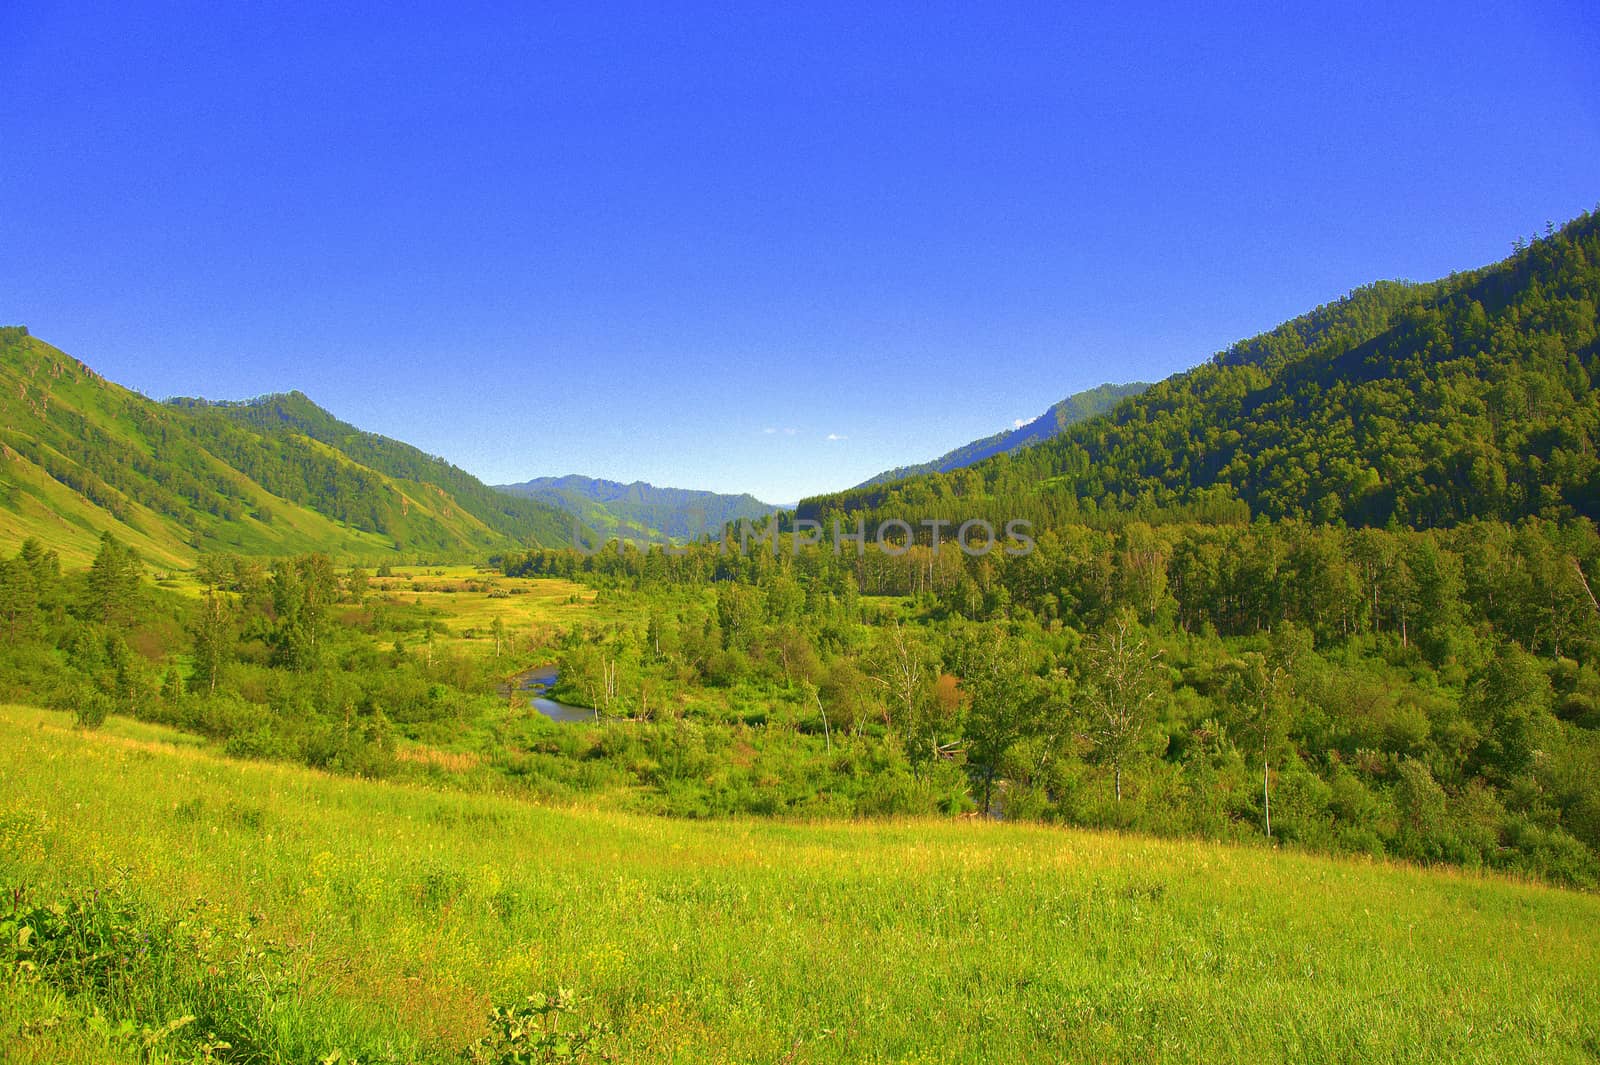 Fertile green valley at the foot of the mountain ranges. Altai, Siberia, Russia.